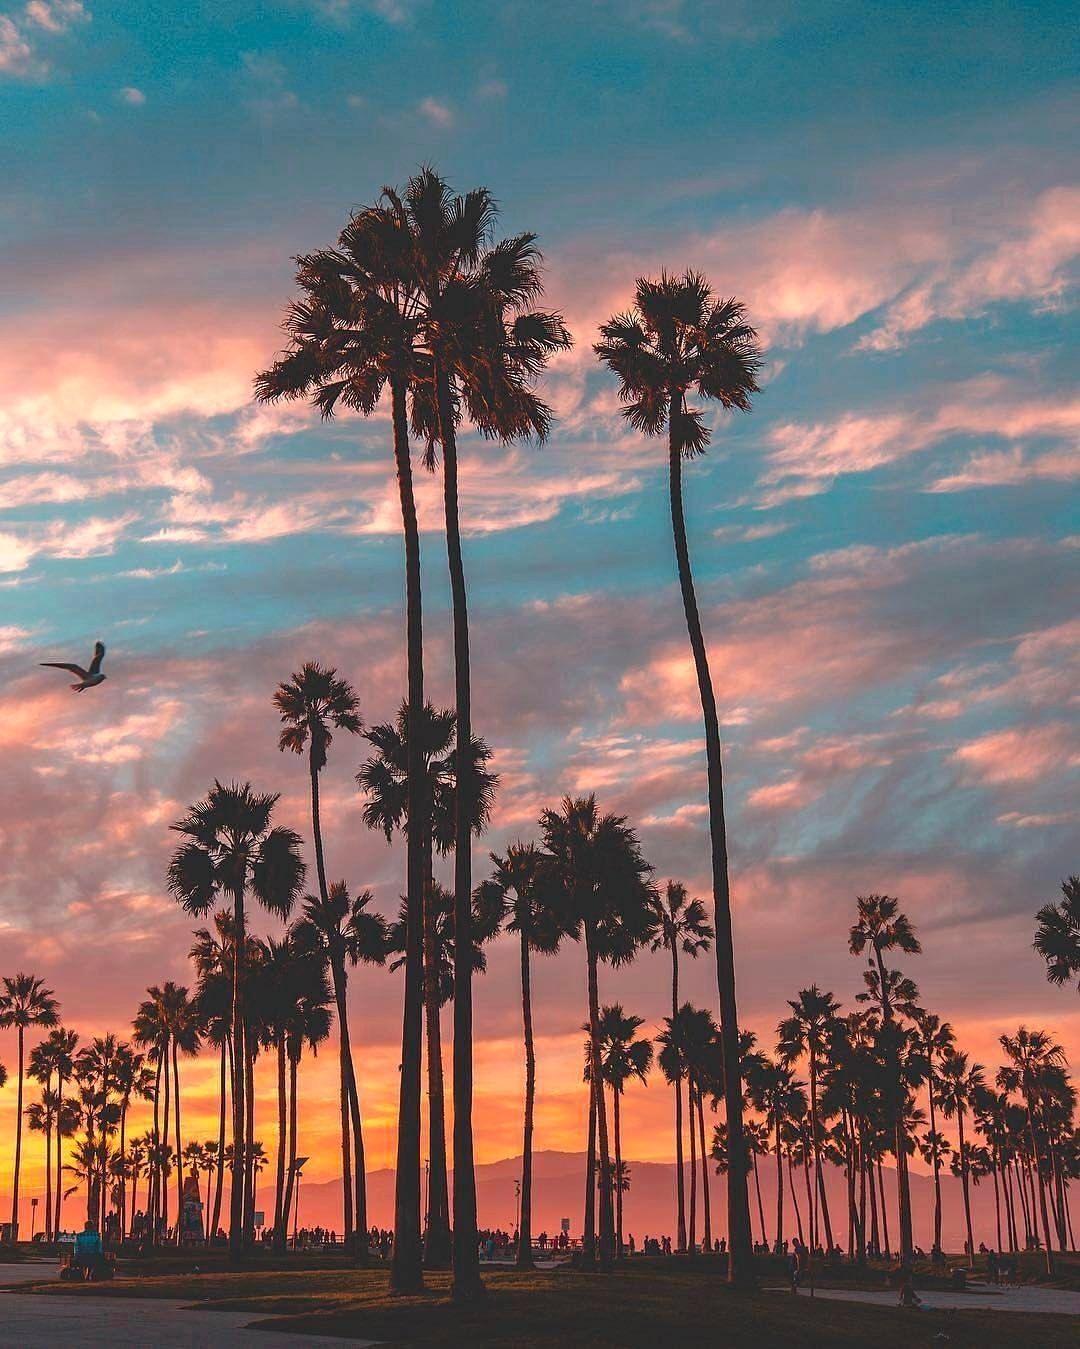 A sunset over palm trees and the ocean - Los Angeles